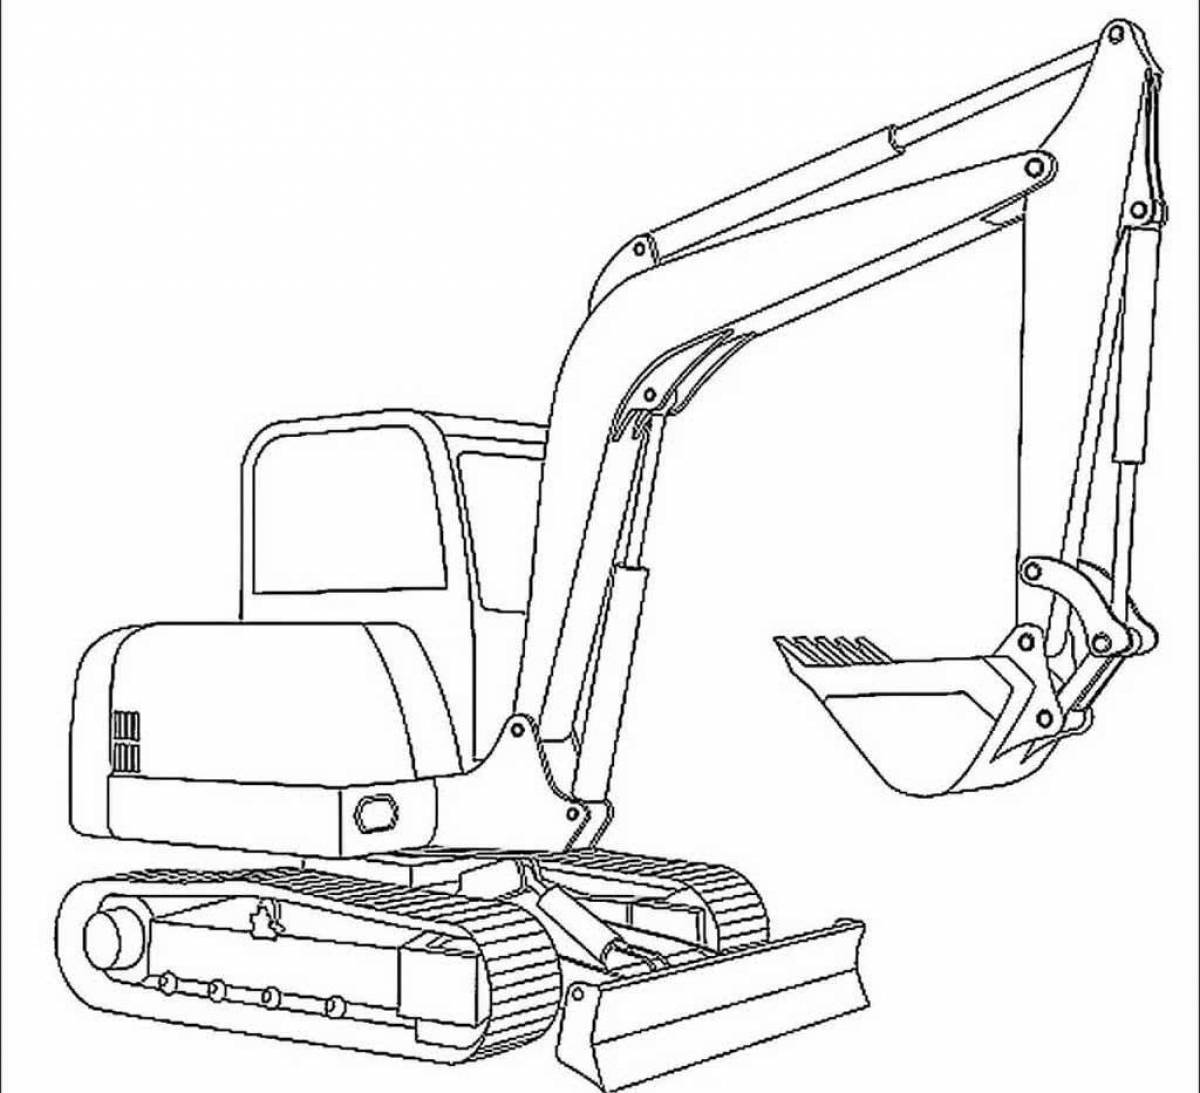 Coloring book of a cheerful excavator for children